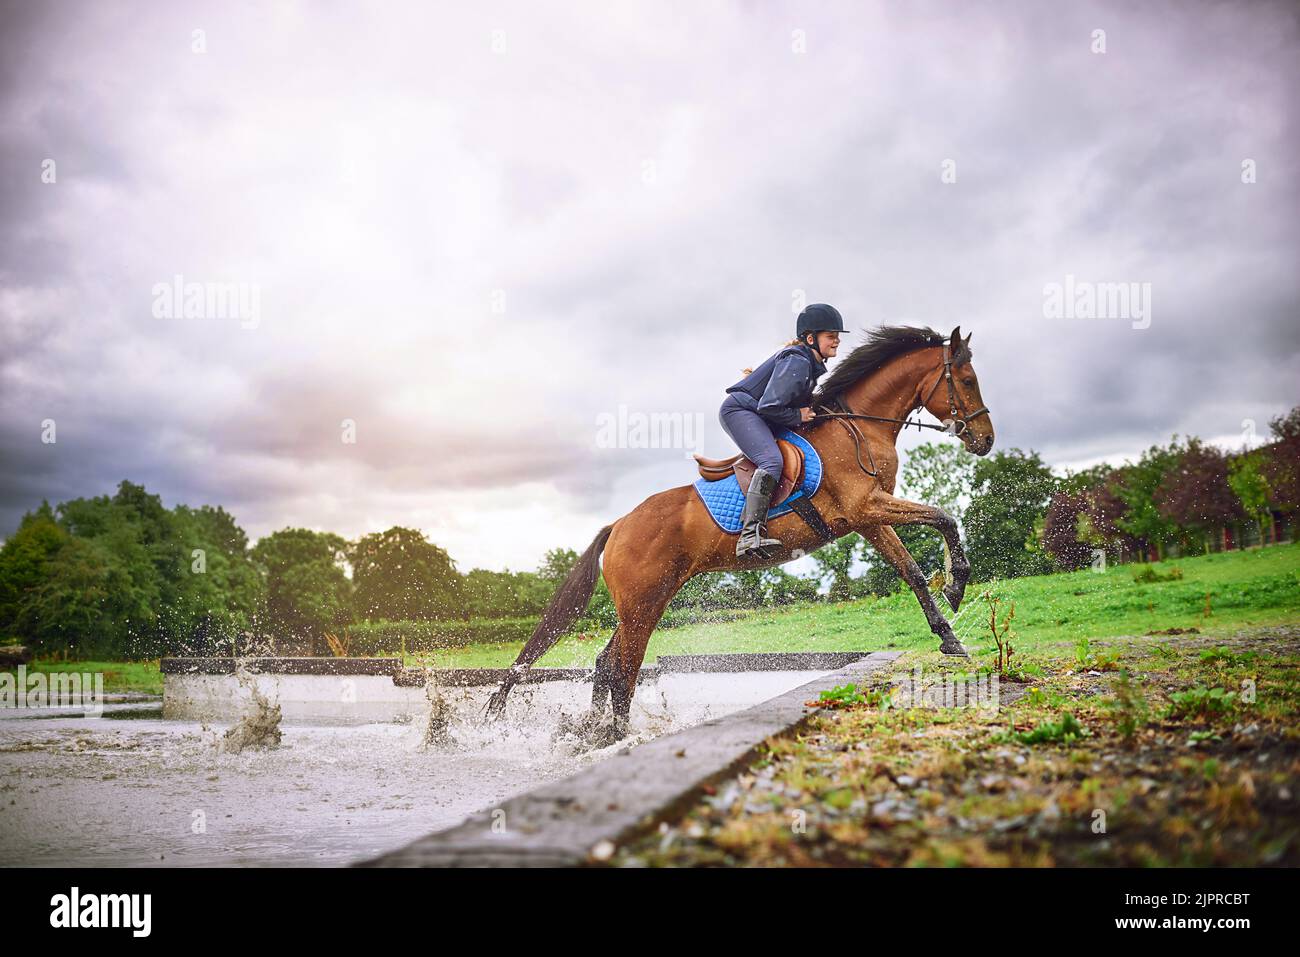 Hold onto what makes you happy. a teenage girl going horseback riding on a ranch. Stock Photo